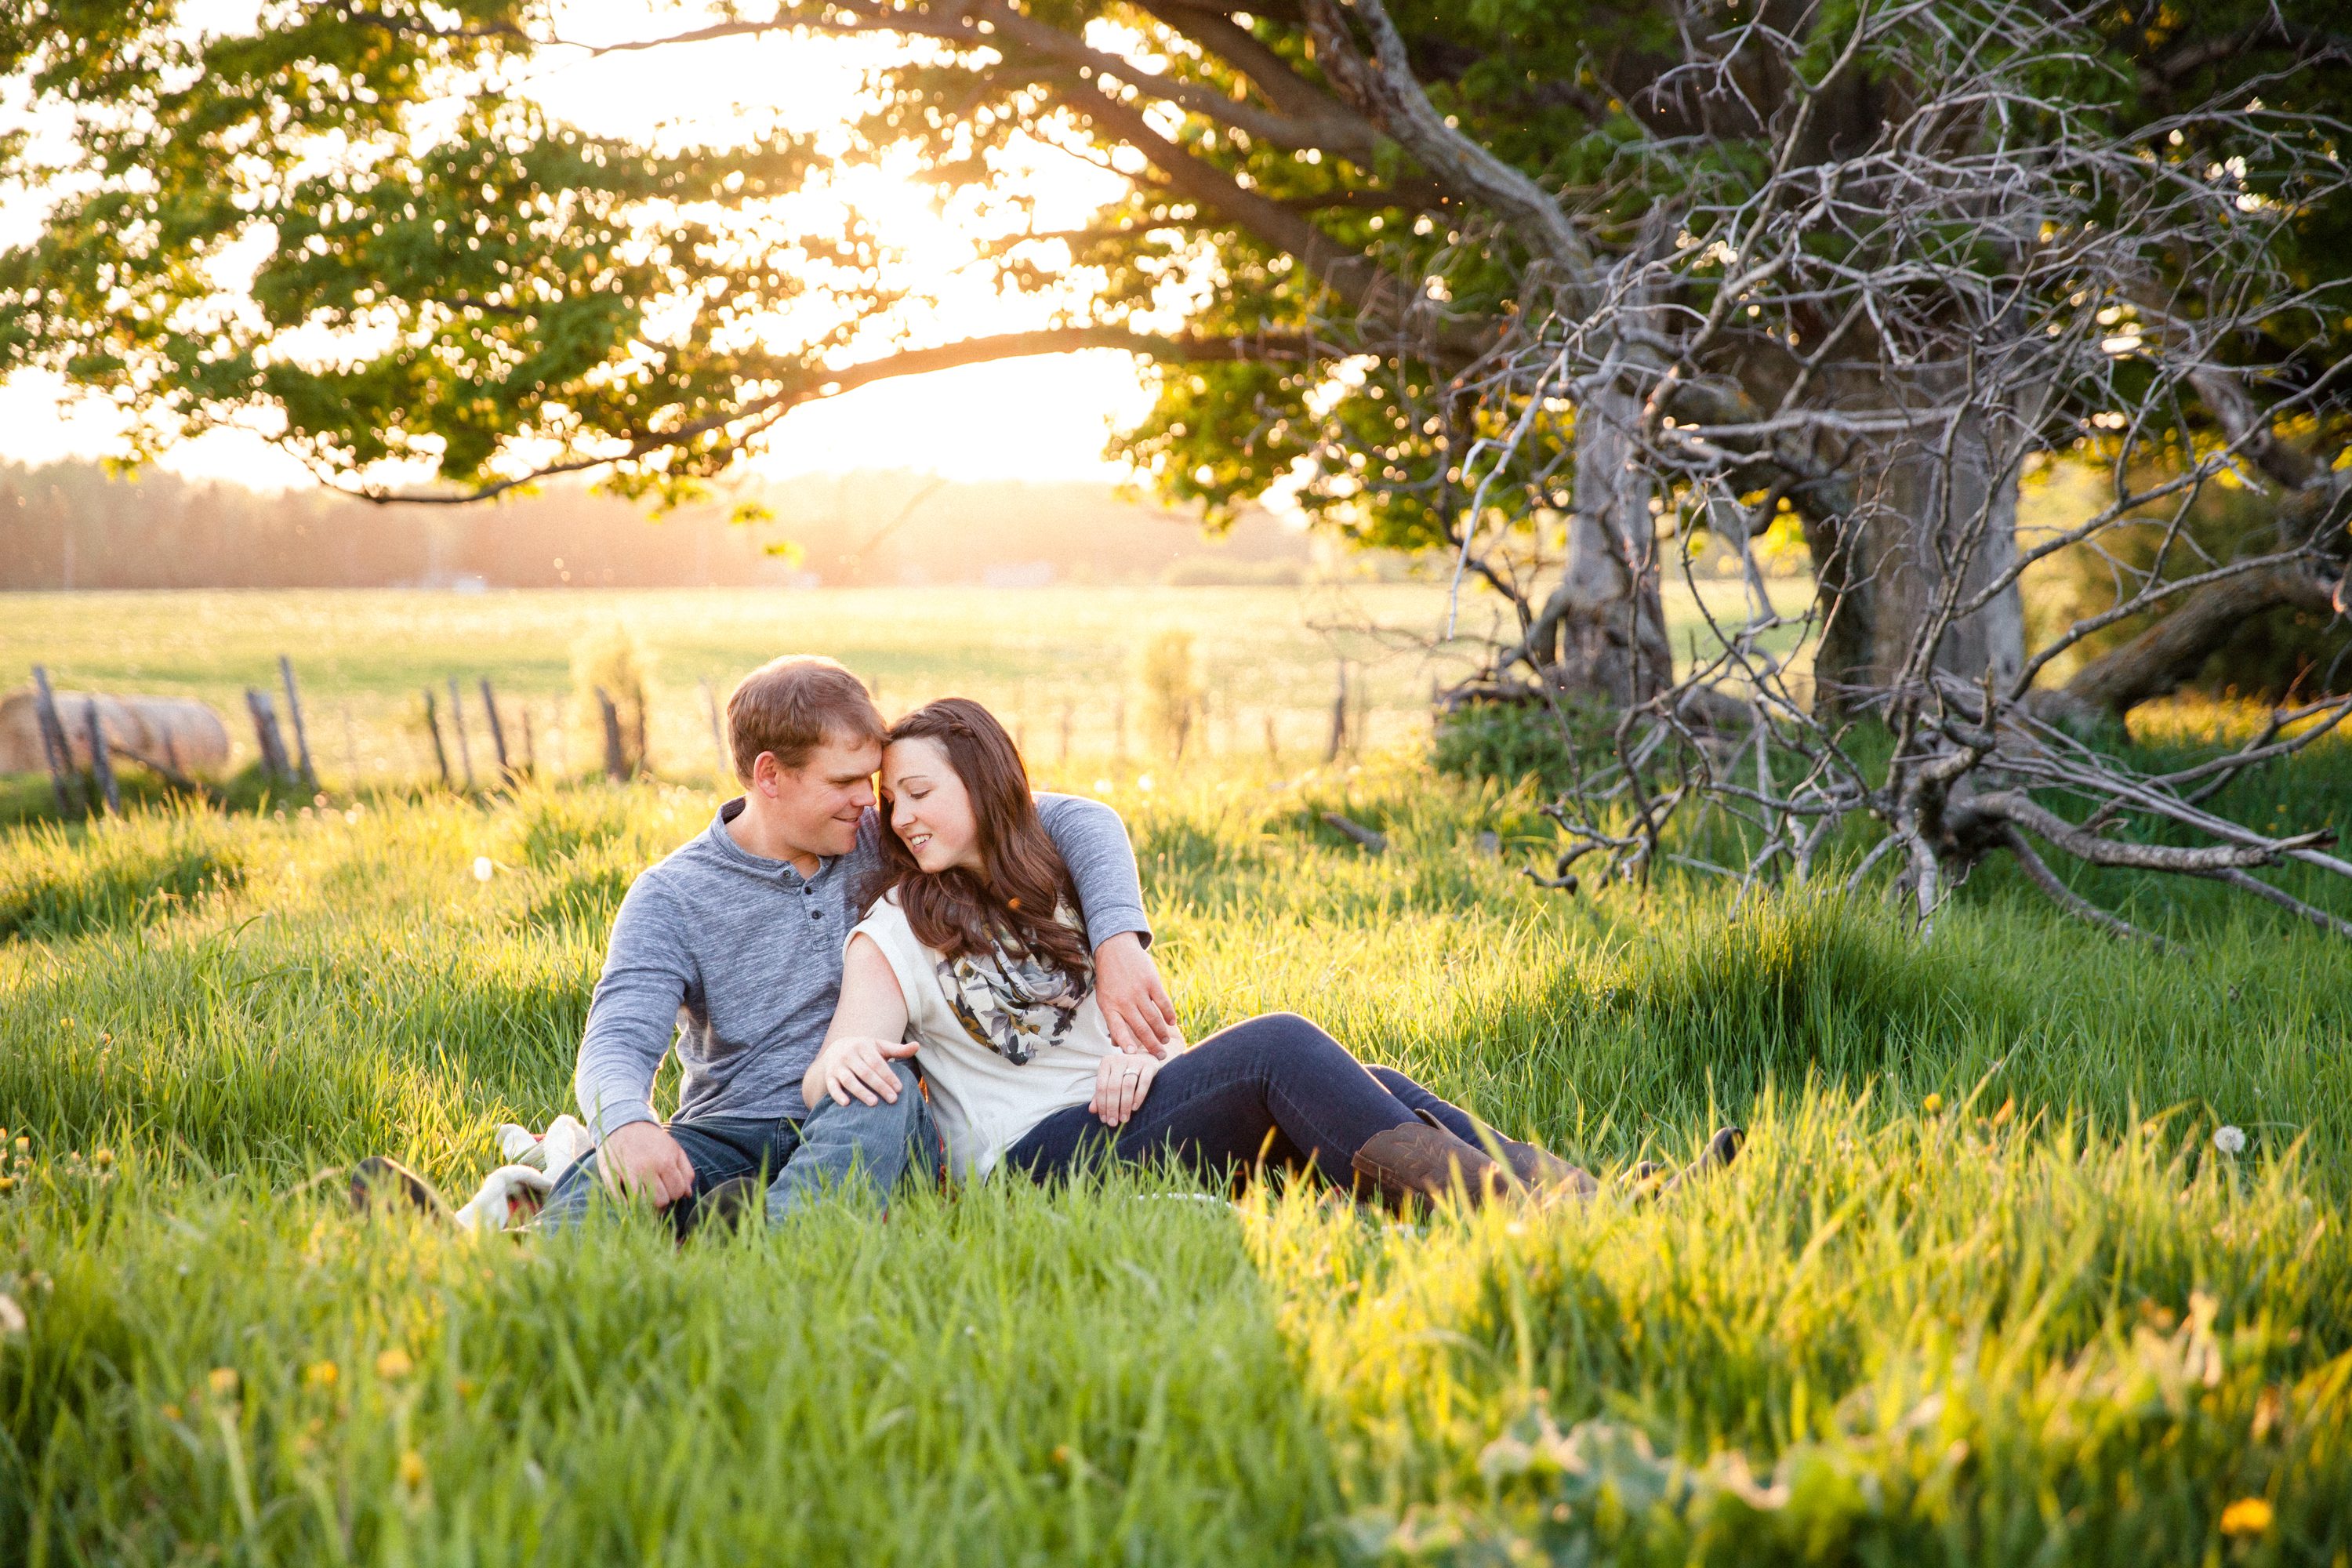 A Farm Engagement Session in Finch, Ottawa, ON